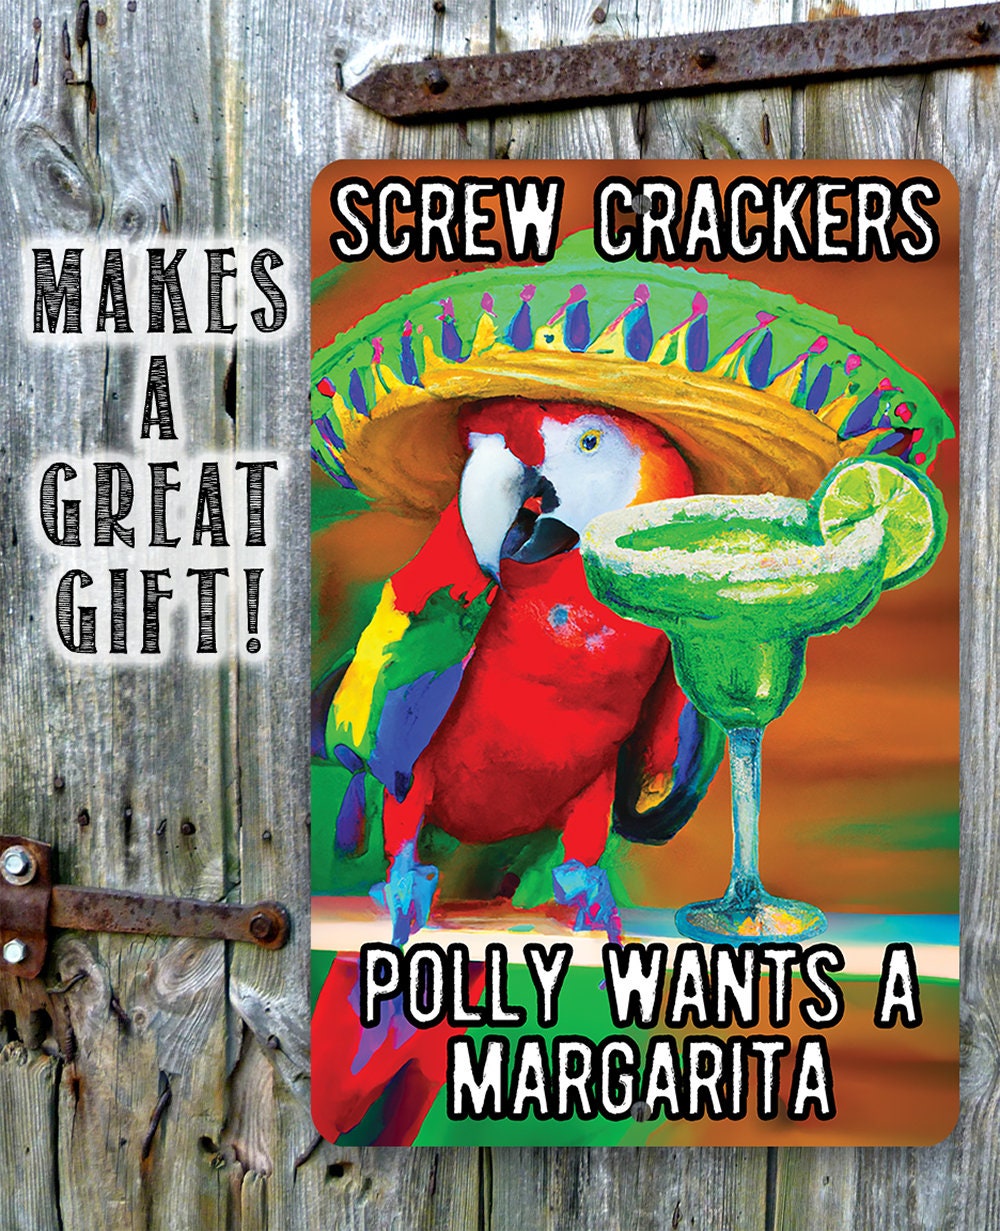 Screw Crackers Polly Wants a Margarita - 8" x 12" or 12" x 18" Aluminum Tin Awesome Metal Poster Metal Sign Lone Star Art 